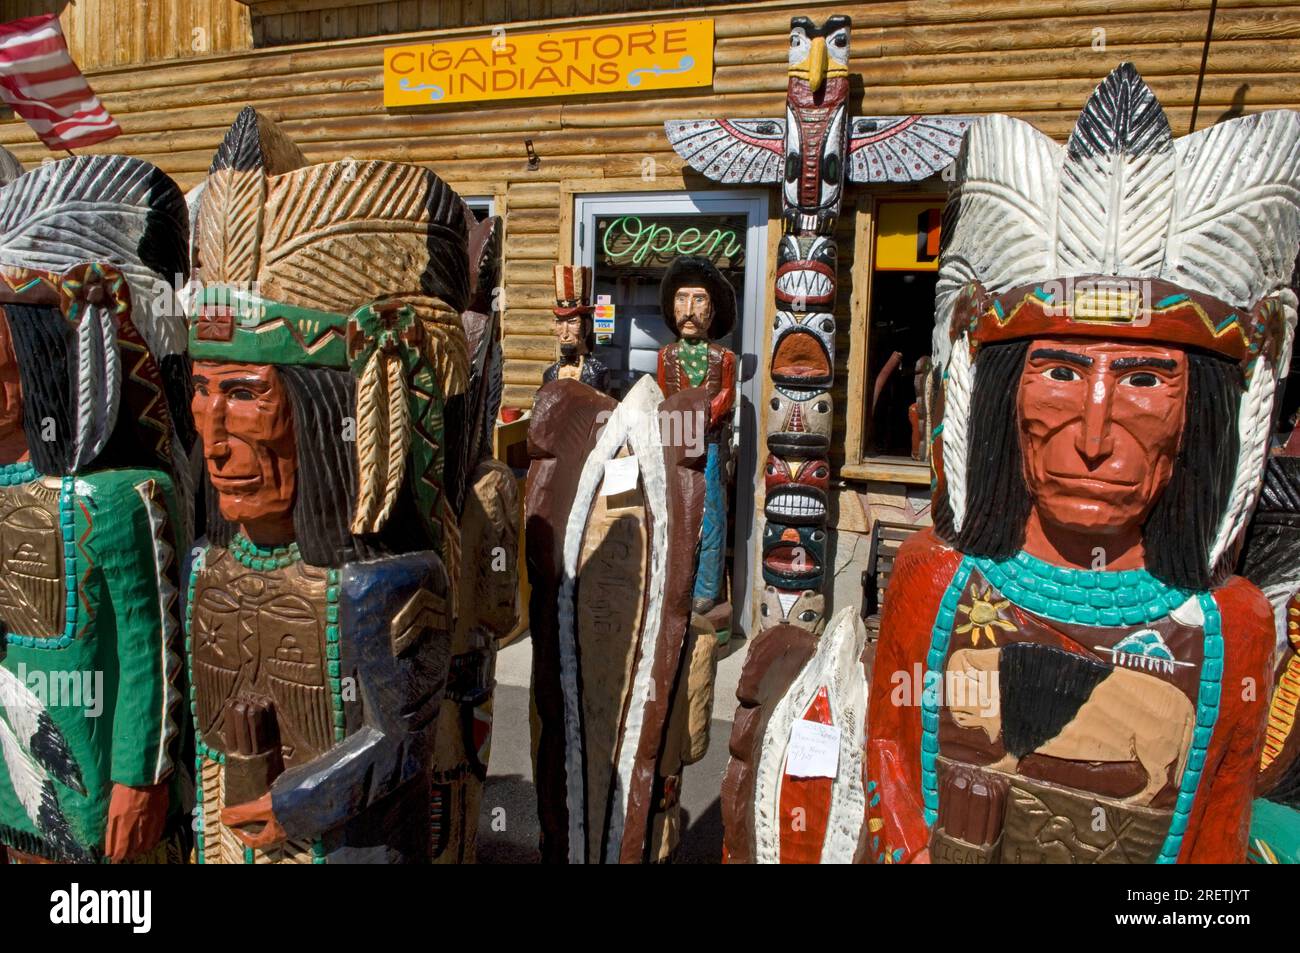 Cigar Store Indians on display in Jackson Hole, Wyoming, USA Stock Photo